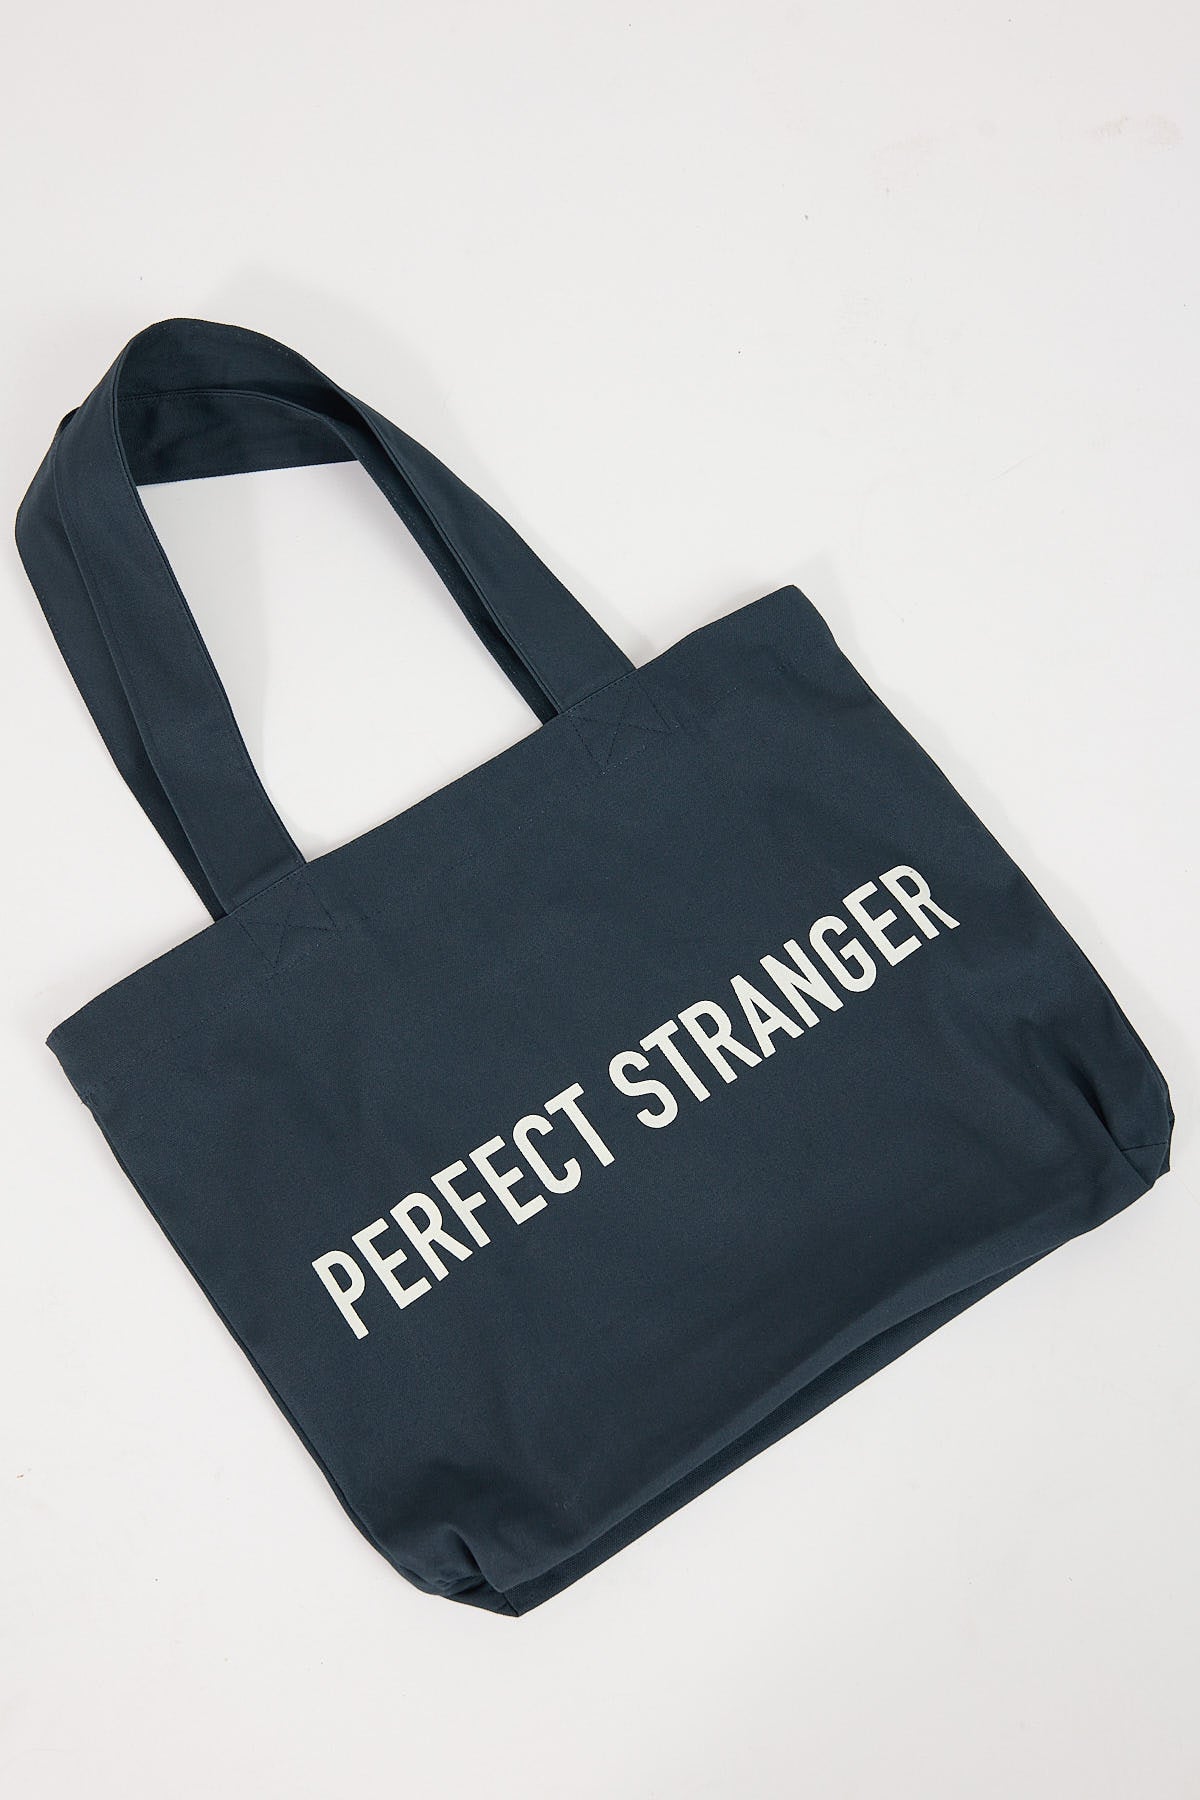 Perfect Stranger Perfect Stranger Recycled Tote Blueberry